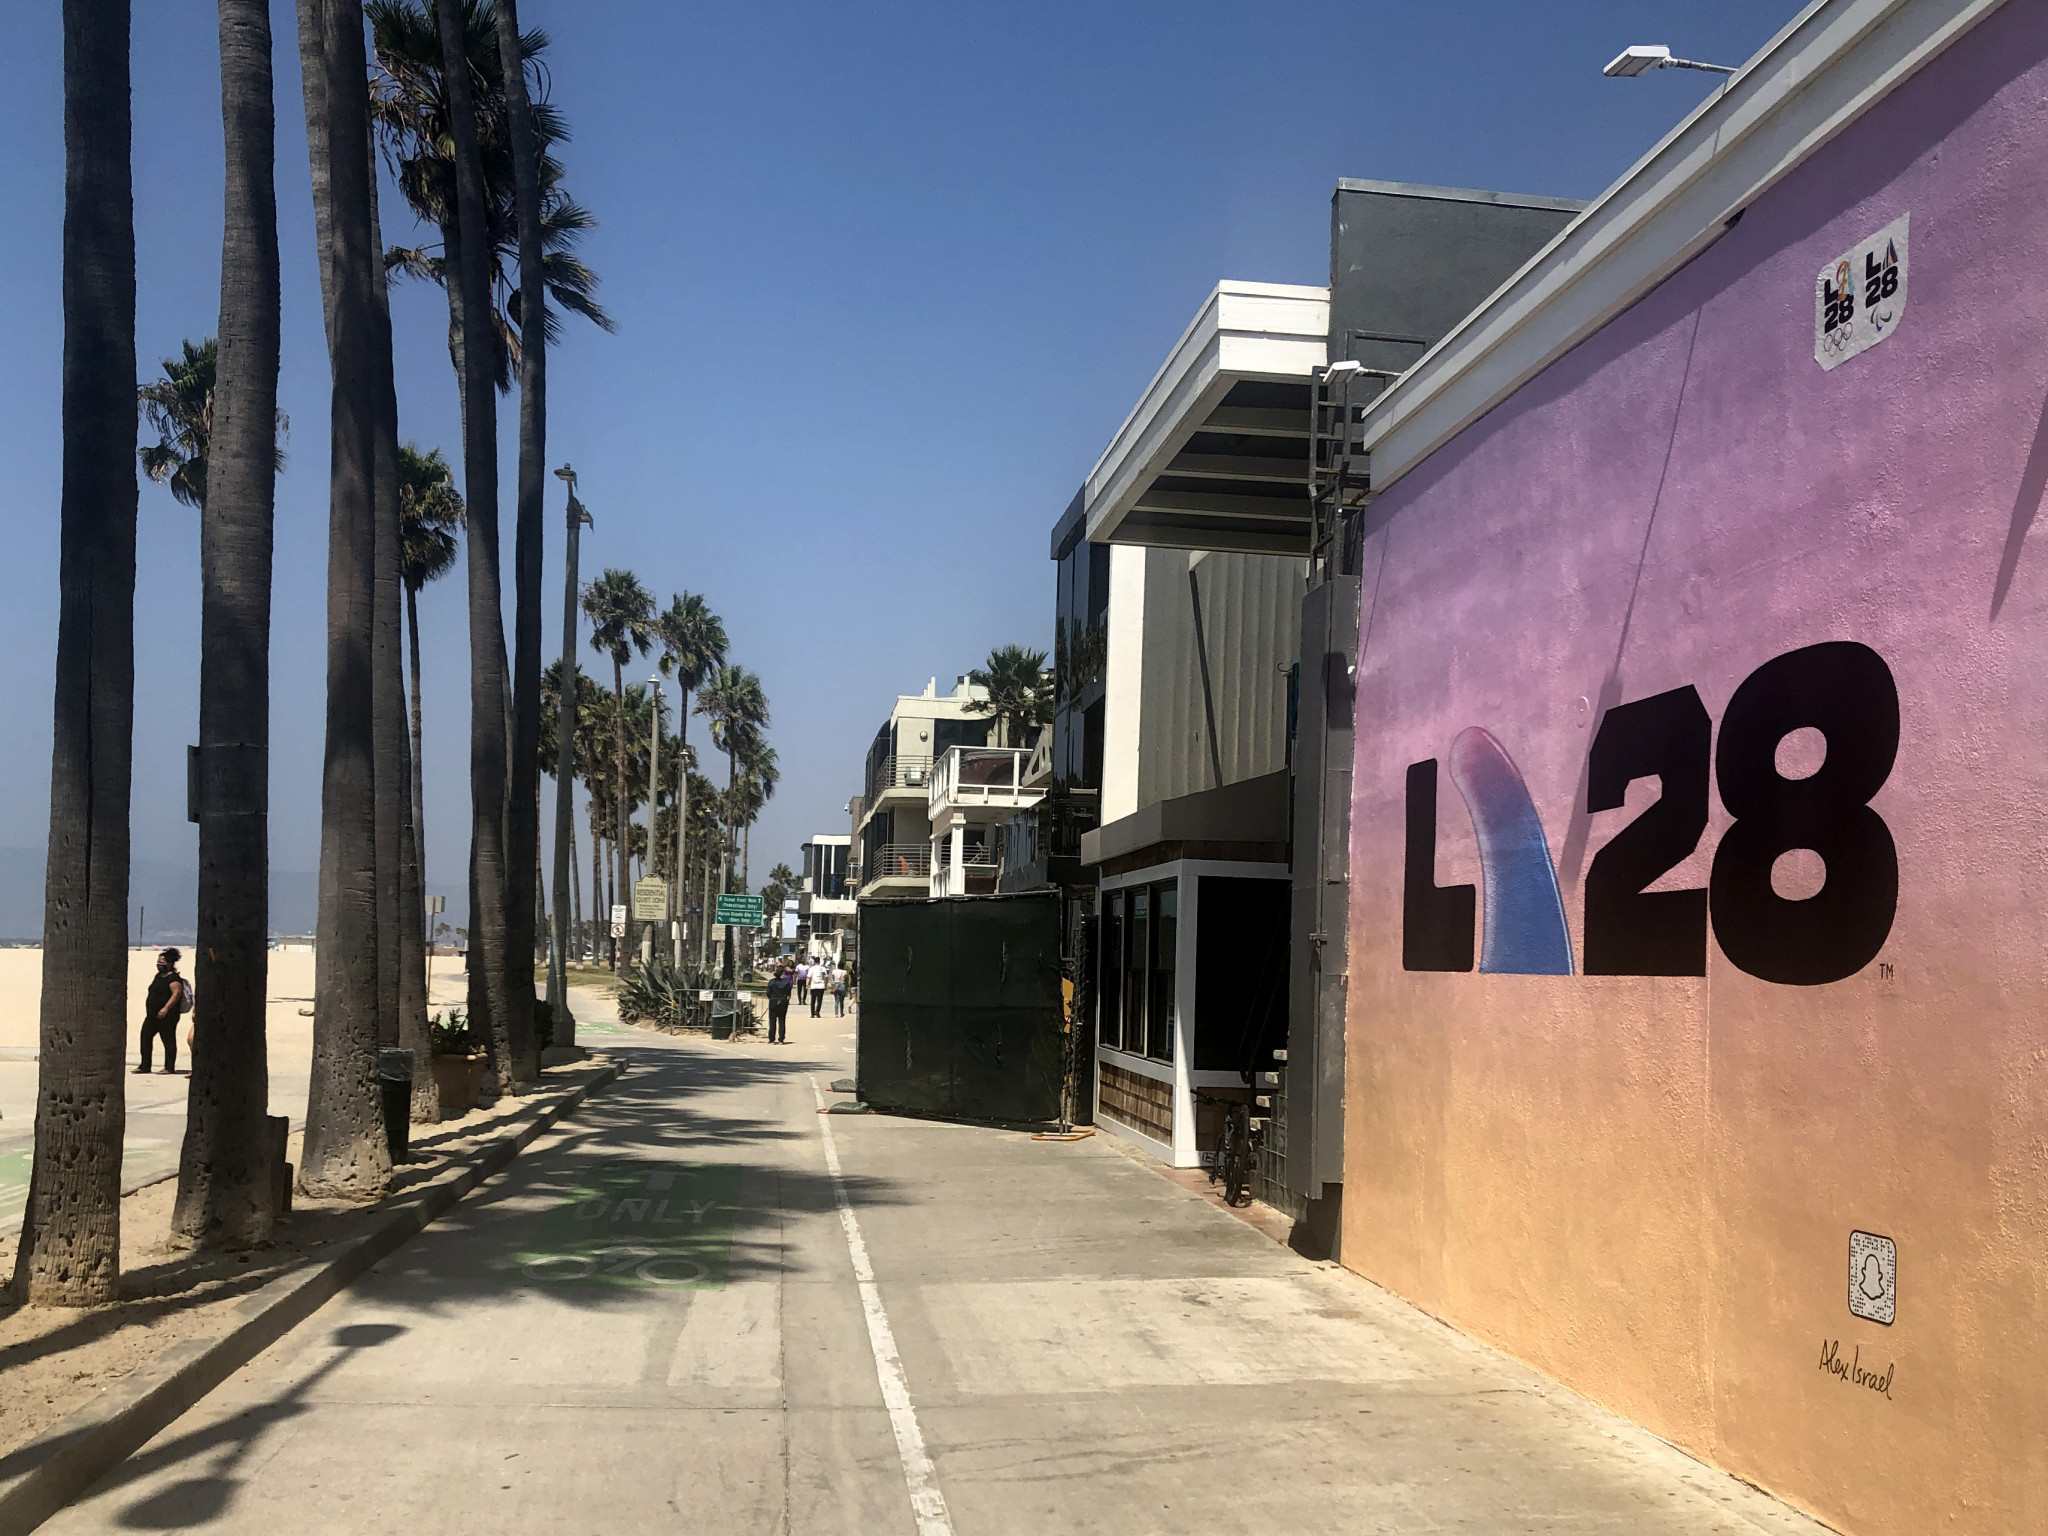 Los Angeles 2028 encourages former athletes to apply for fellowship programme